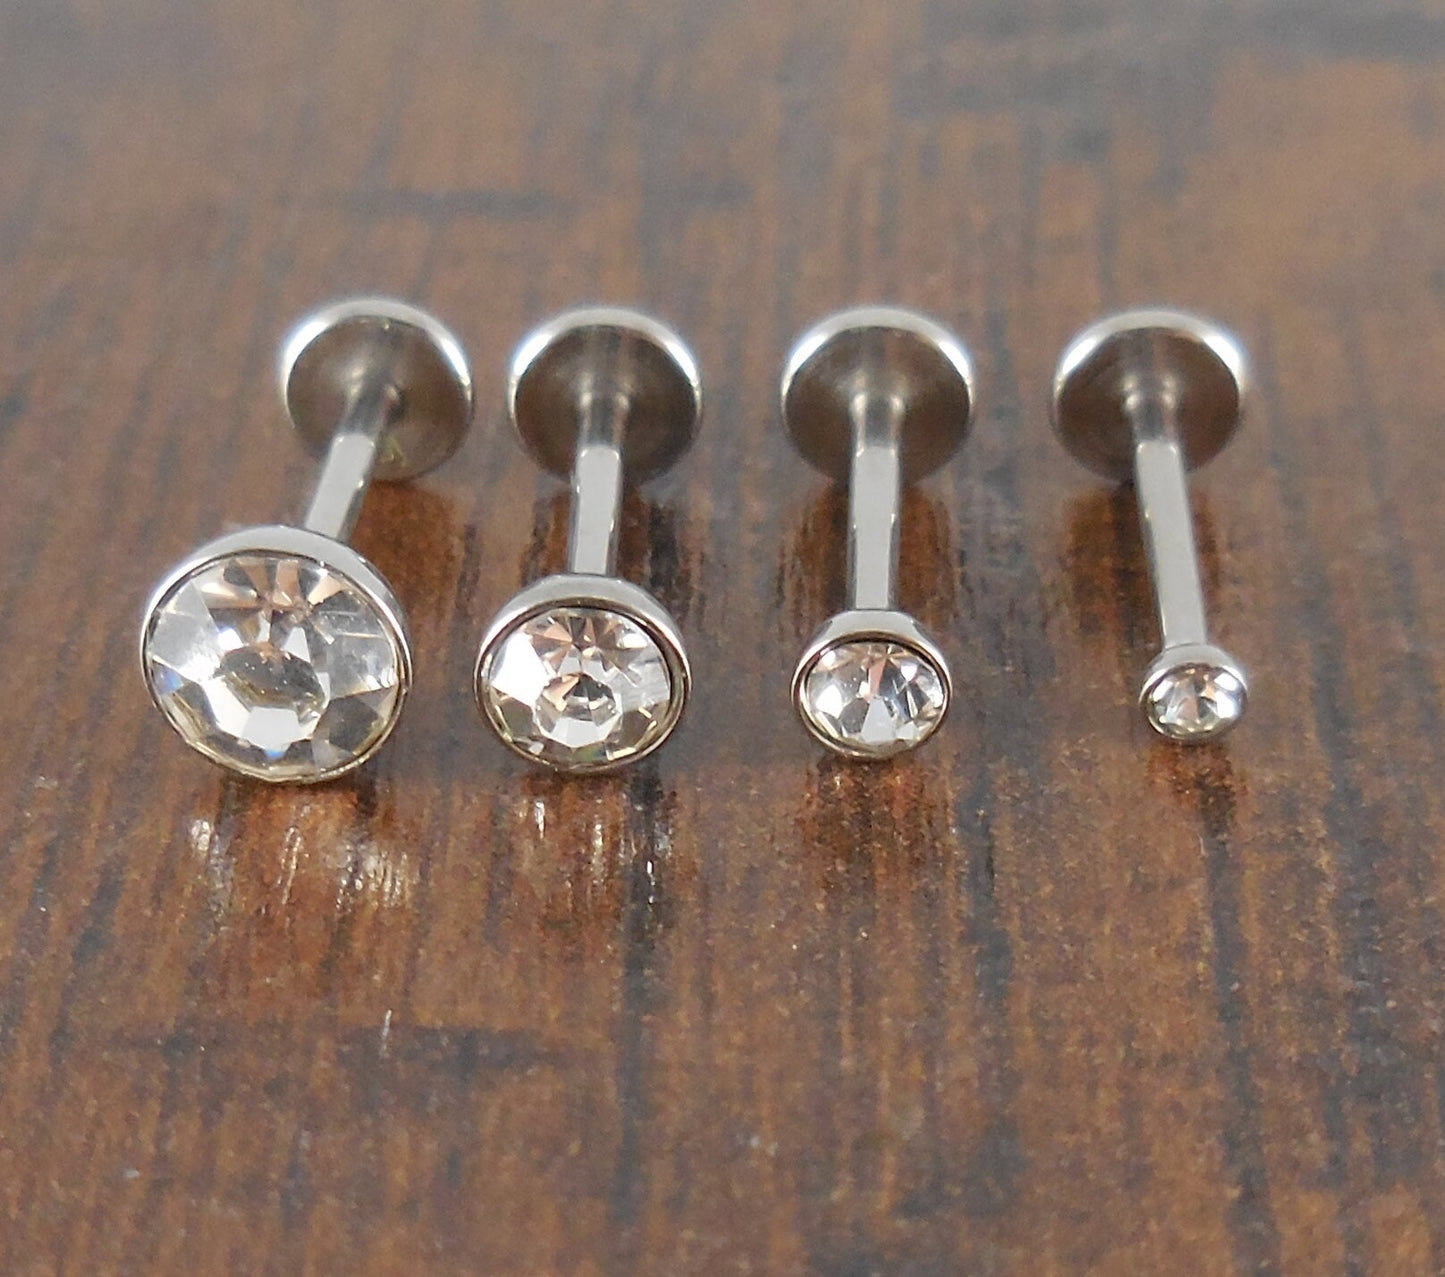 18g 2, 3, 4 or 5mm Clear Cubic Zirconia 6mm or 8mm Thread less Push Pin Triple Forward Stainless Helix Earring Cartilage Labret Nose Ring